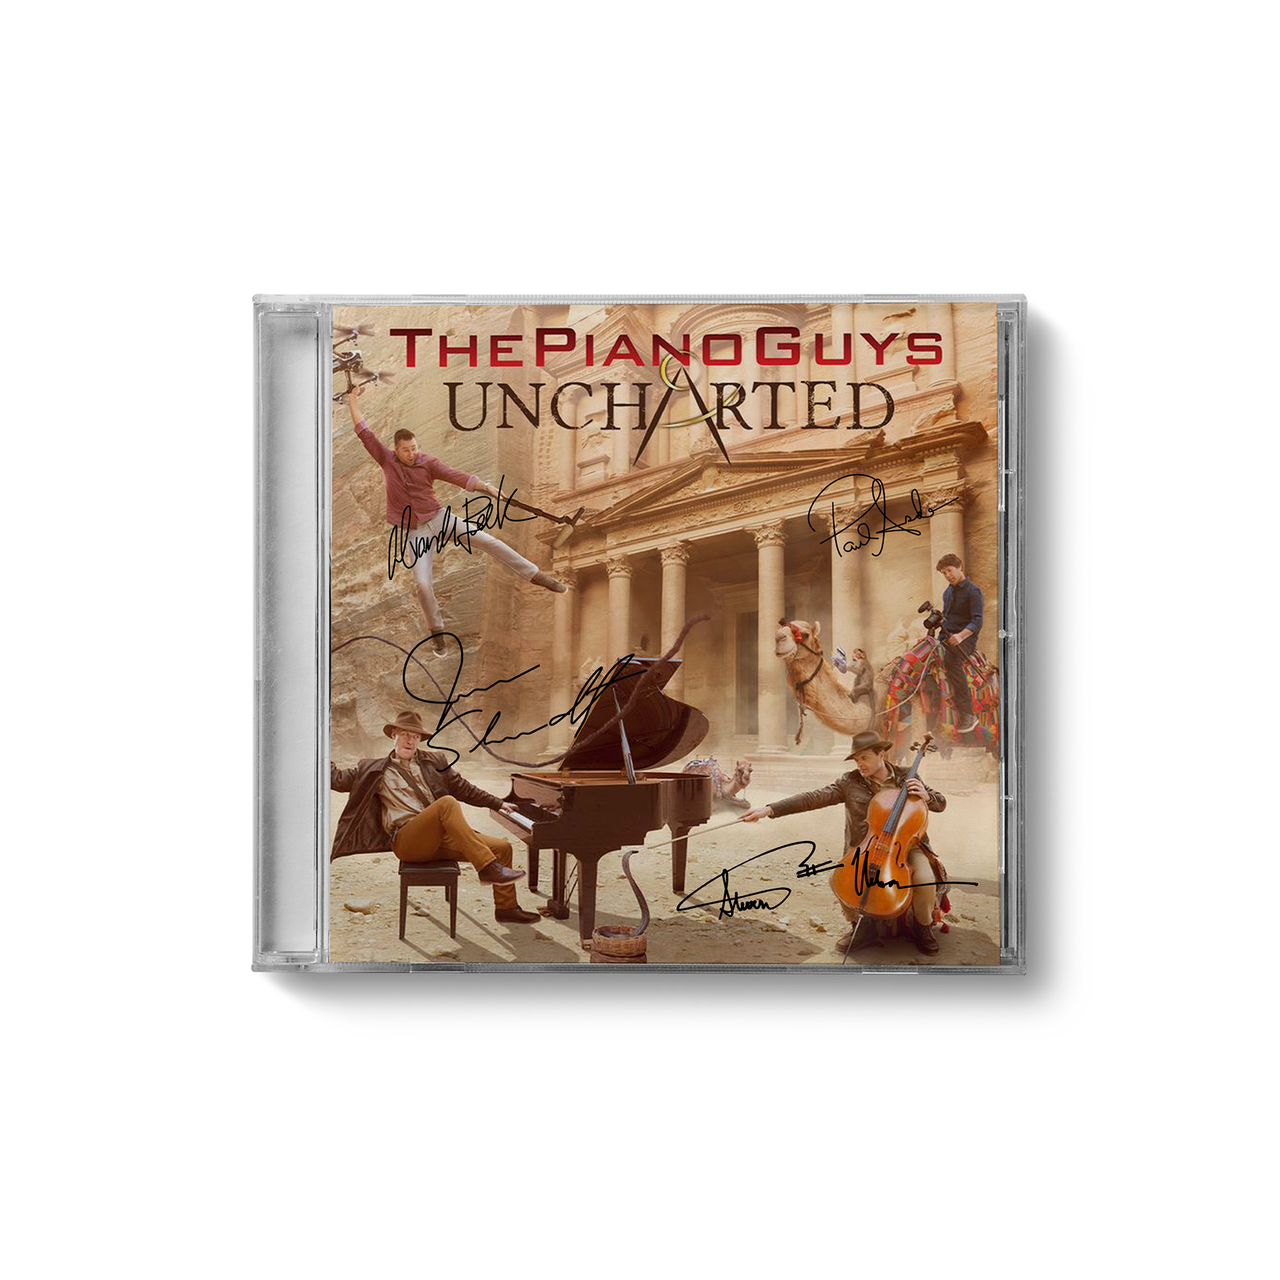 The Piano Guys "UNCHARTED"